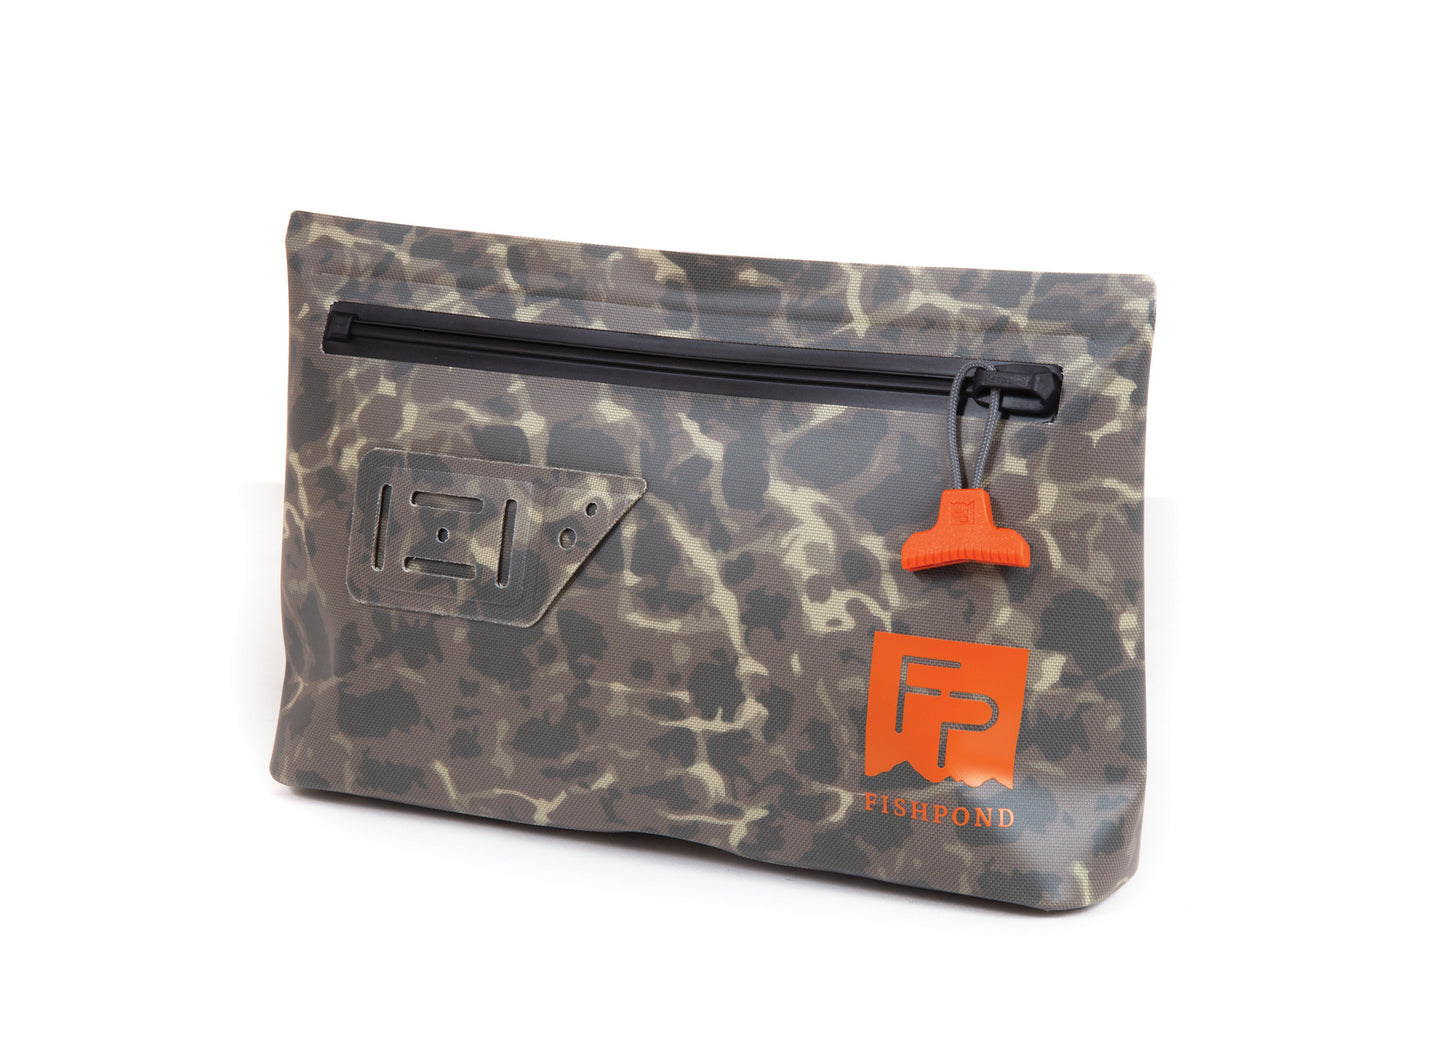 Fishpond Thunderhead Submersible Pouch - Eco - Riverbed Camo